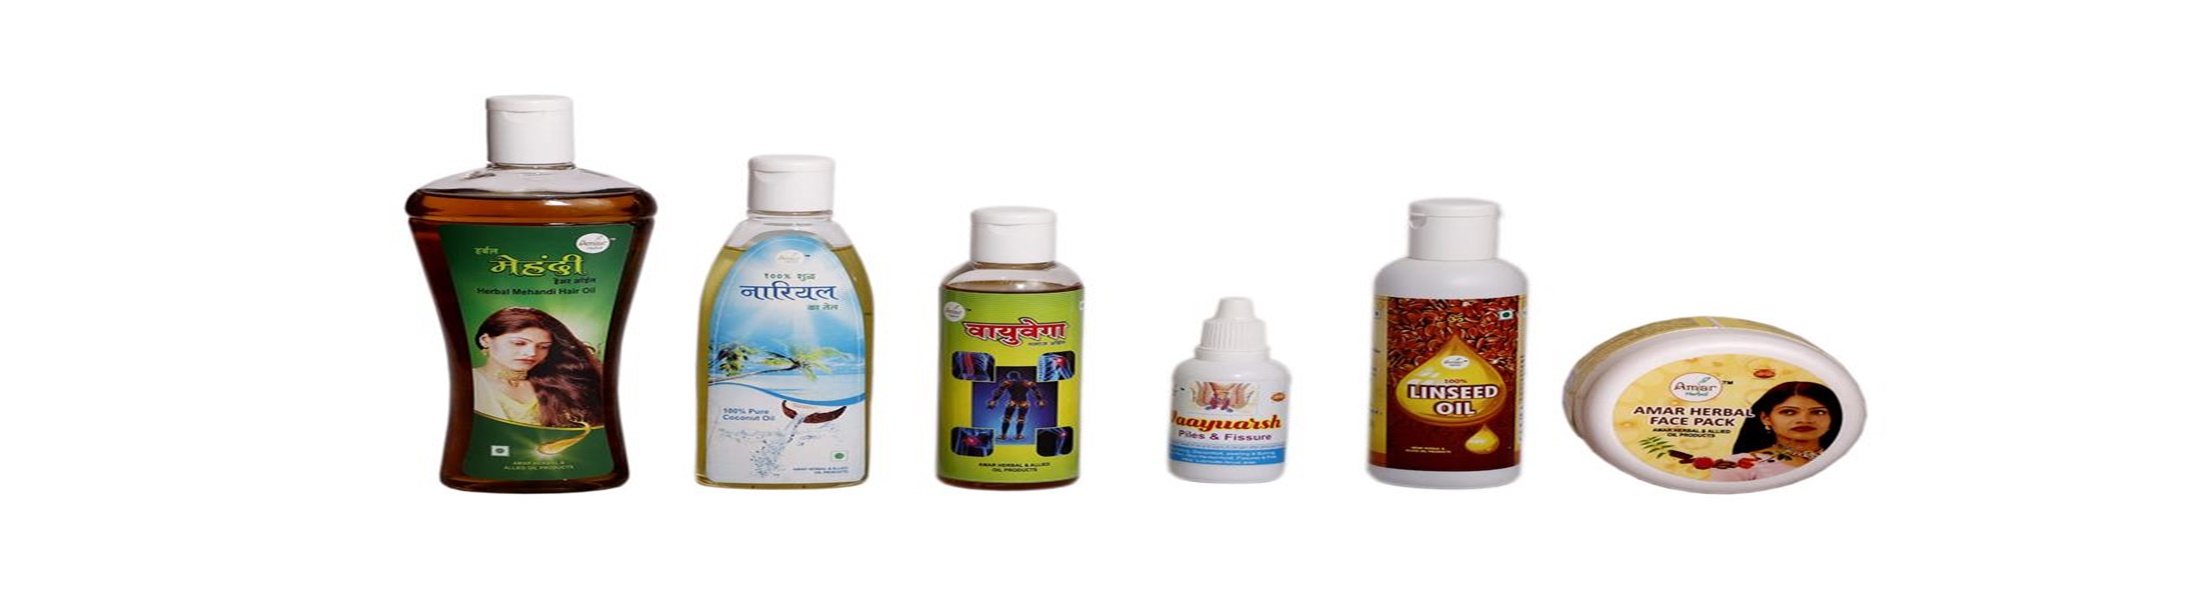 Amar Herbal Oil and Allide Herbal Products